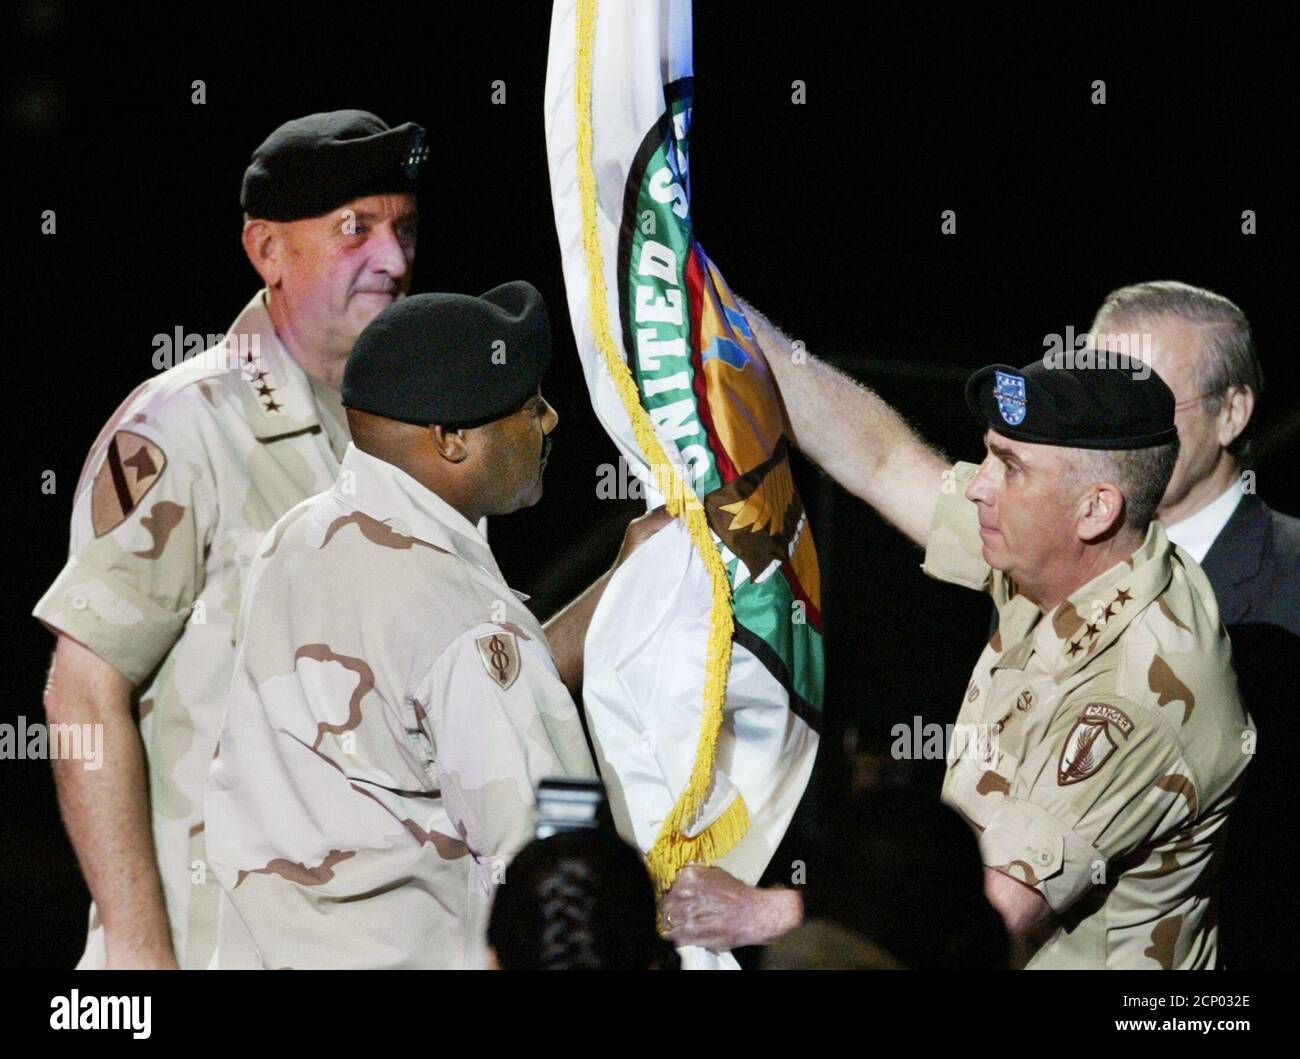 U.S. Army General Tommy Franks (L) looks on as the U.S. Central Command flag is passed to Command Sgt. Major Dwight Brown, (second from left) by Army Gen. John Abizaid who replaces Franks during a change of command ceremony in Tampa, Florida July 7, 2003. Obscured at right is Secretary of Defense Donald Rumsfeld. The U.S. Central Command is headquartered at MacDill Air Force Base in Tampa. REUTERS/Pierre DuCharme Stock Photo